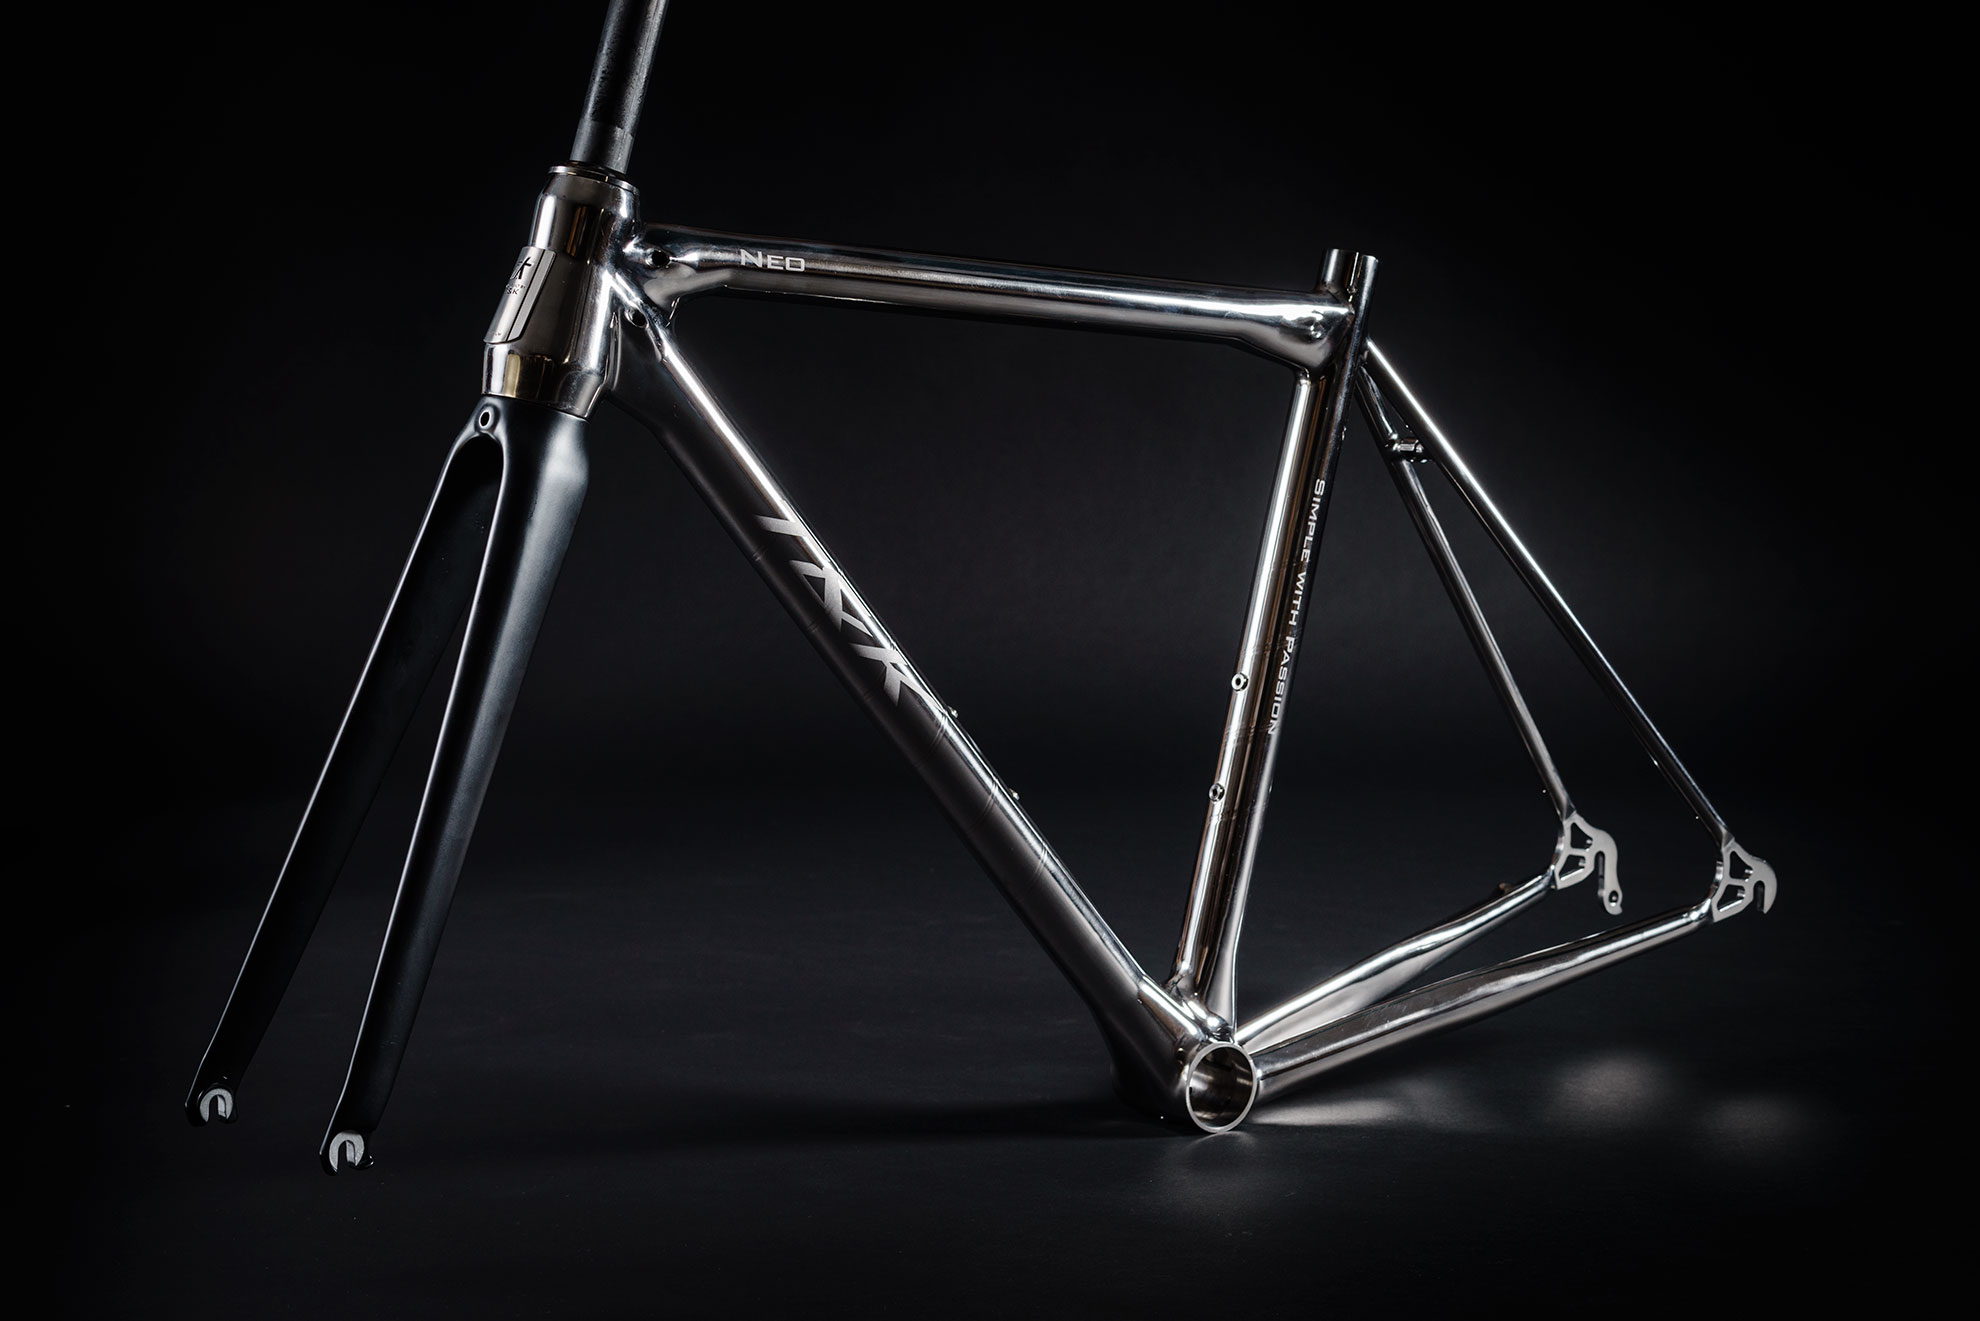 NEO with carbon fork